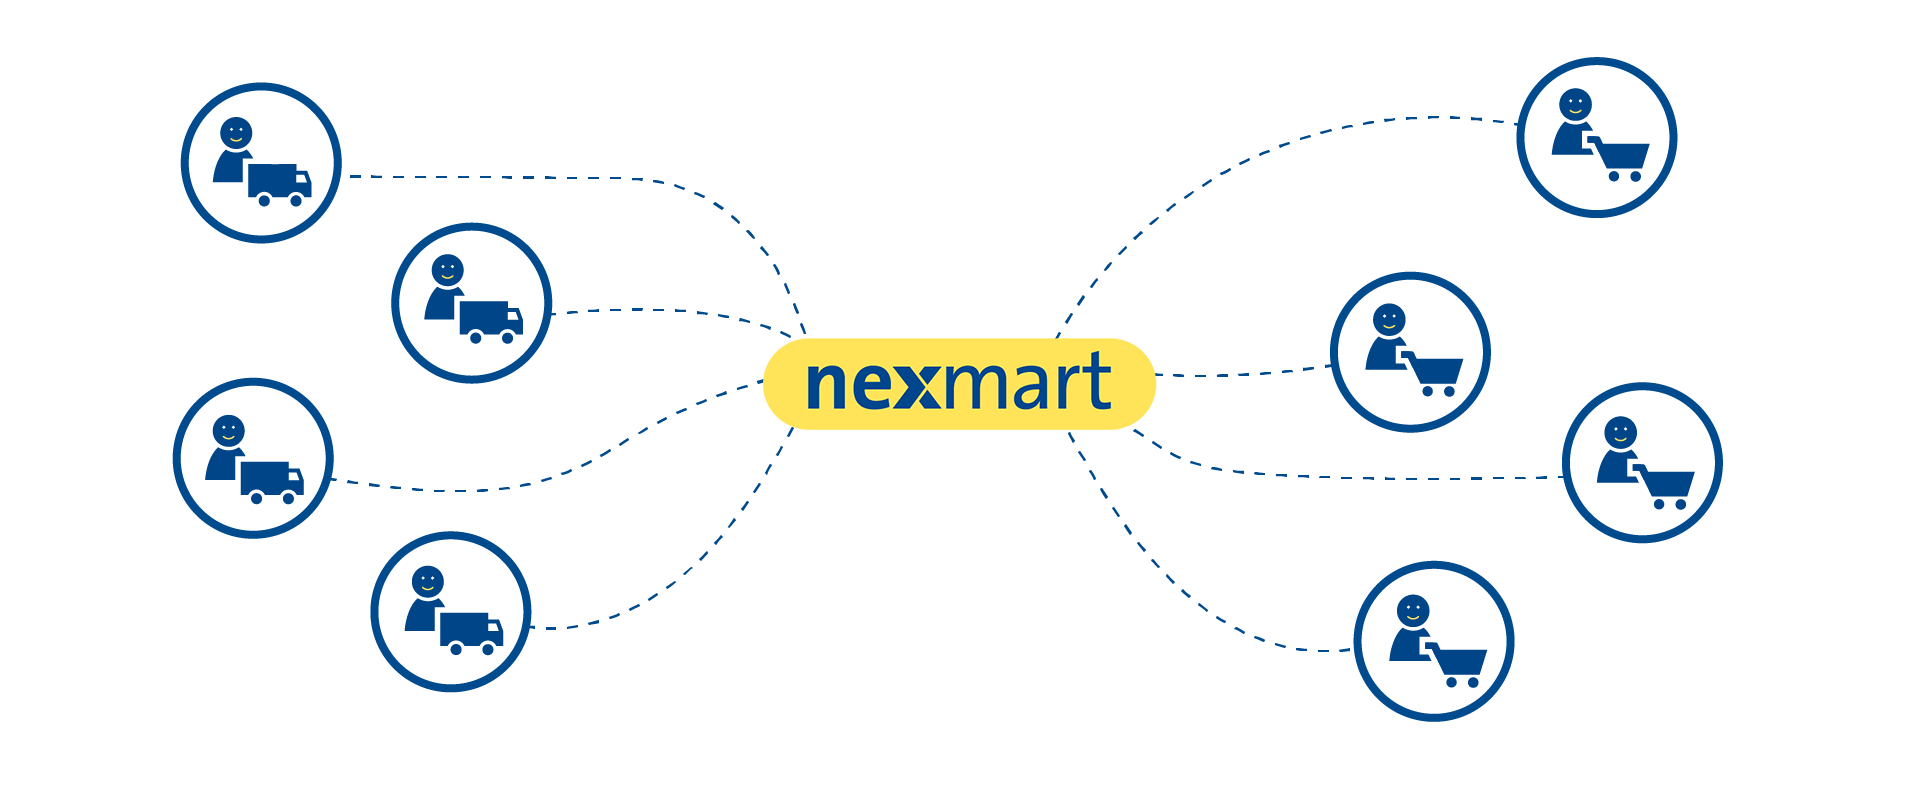 Processes with nexmart